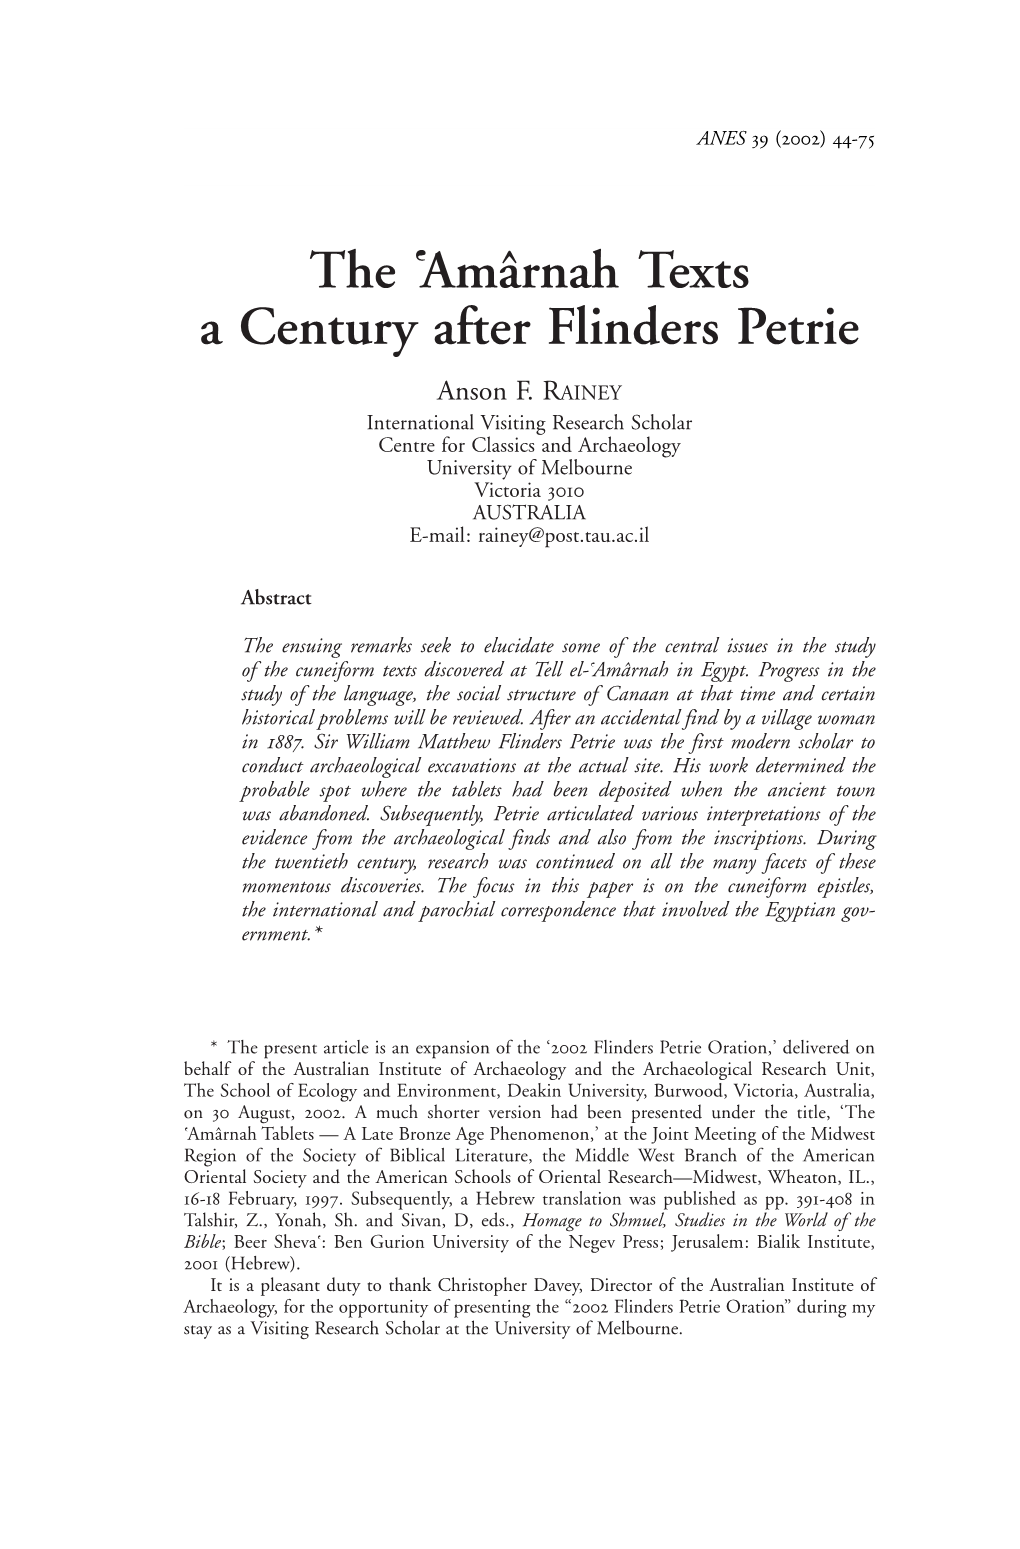 The {Amârnah Texts a Century After Flinders Petrie